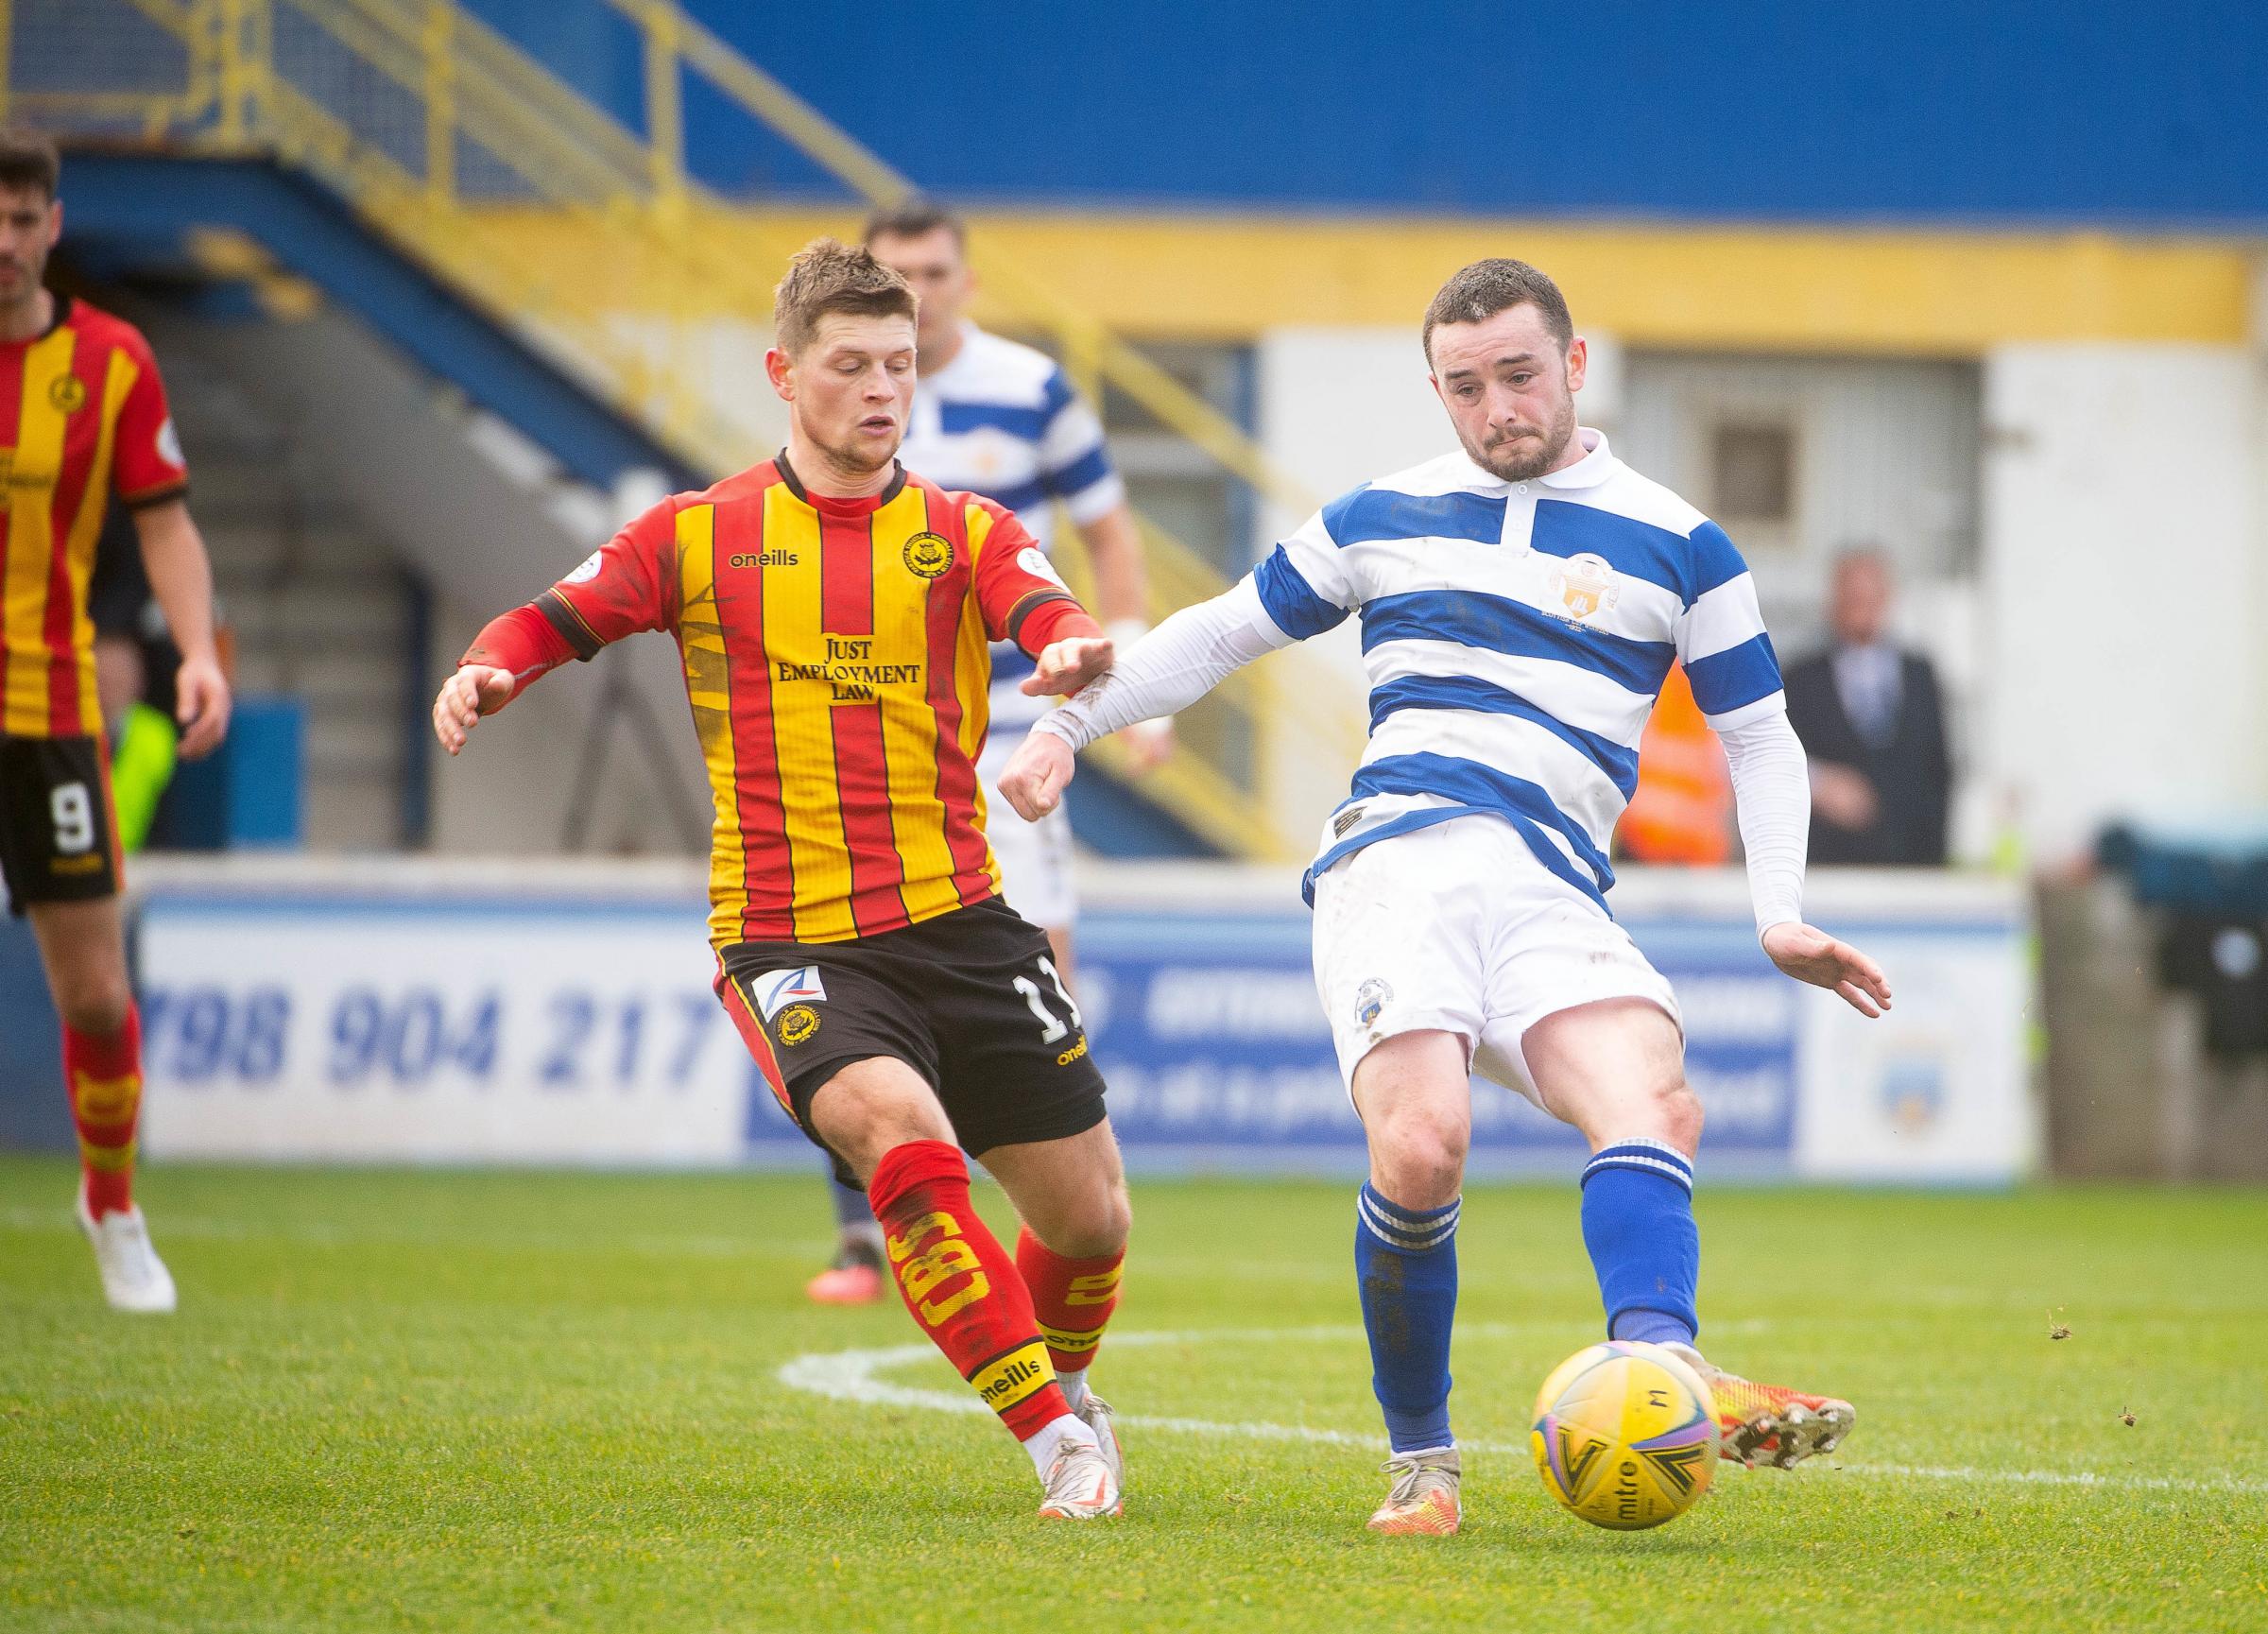 Lewis Strapp snubbed English interest to stay at Morton